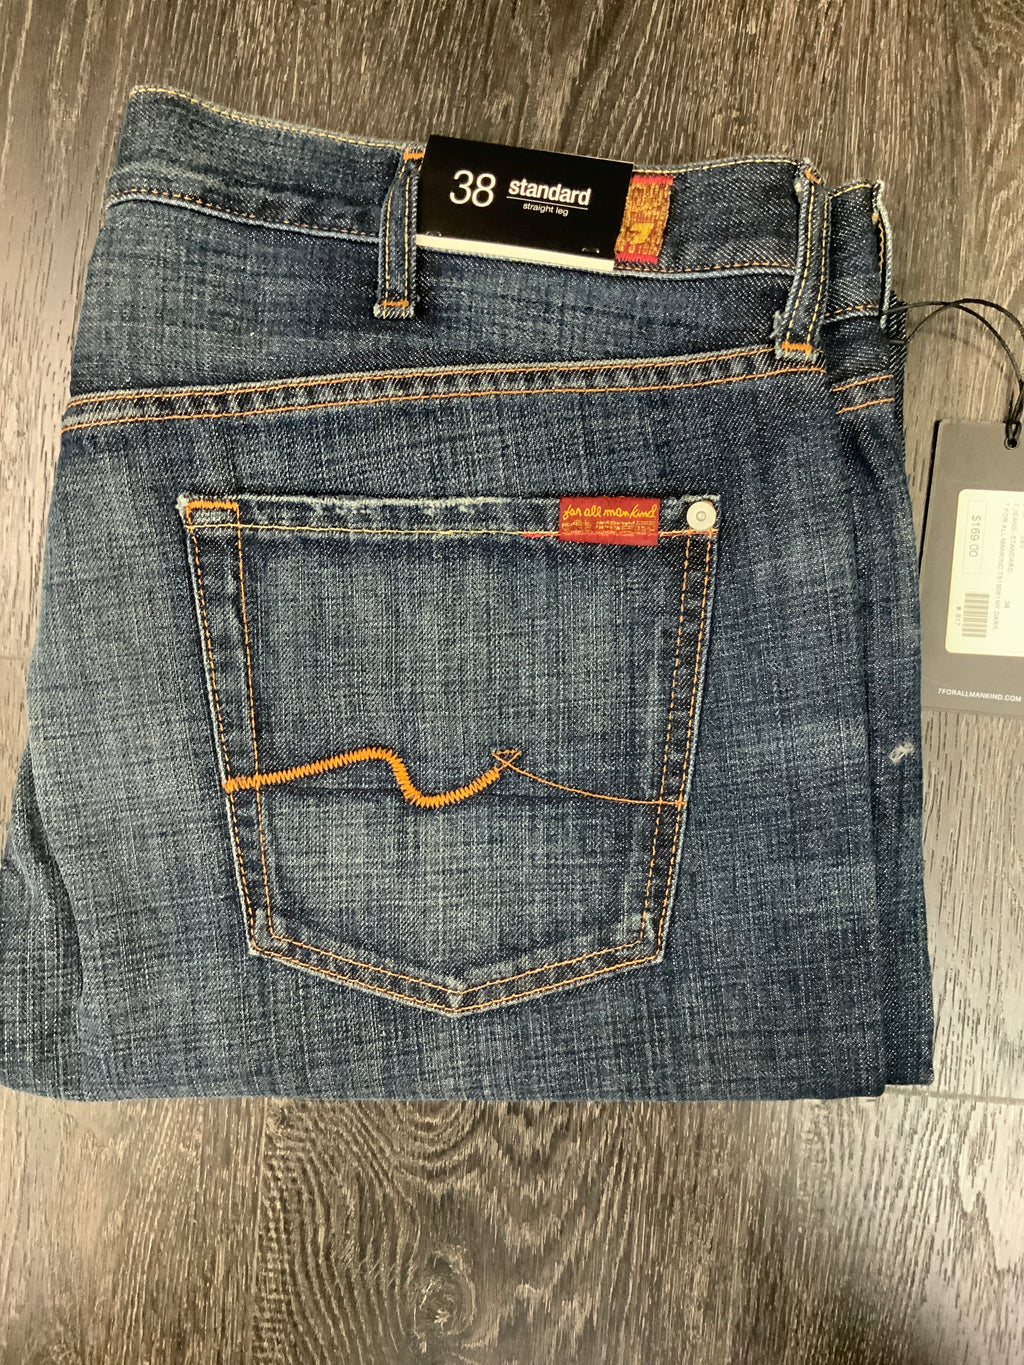 Standard Jean by 7 for all Mankind